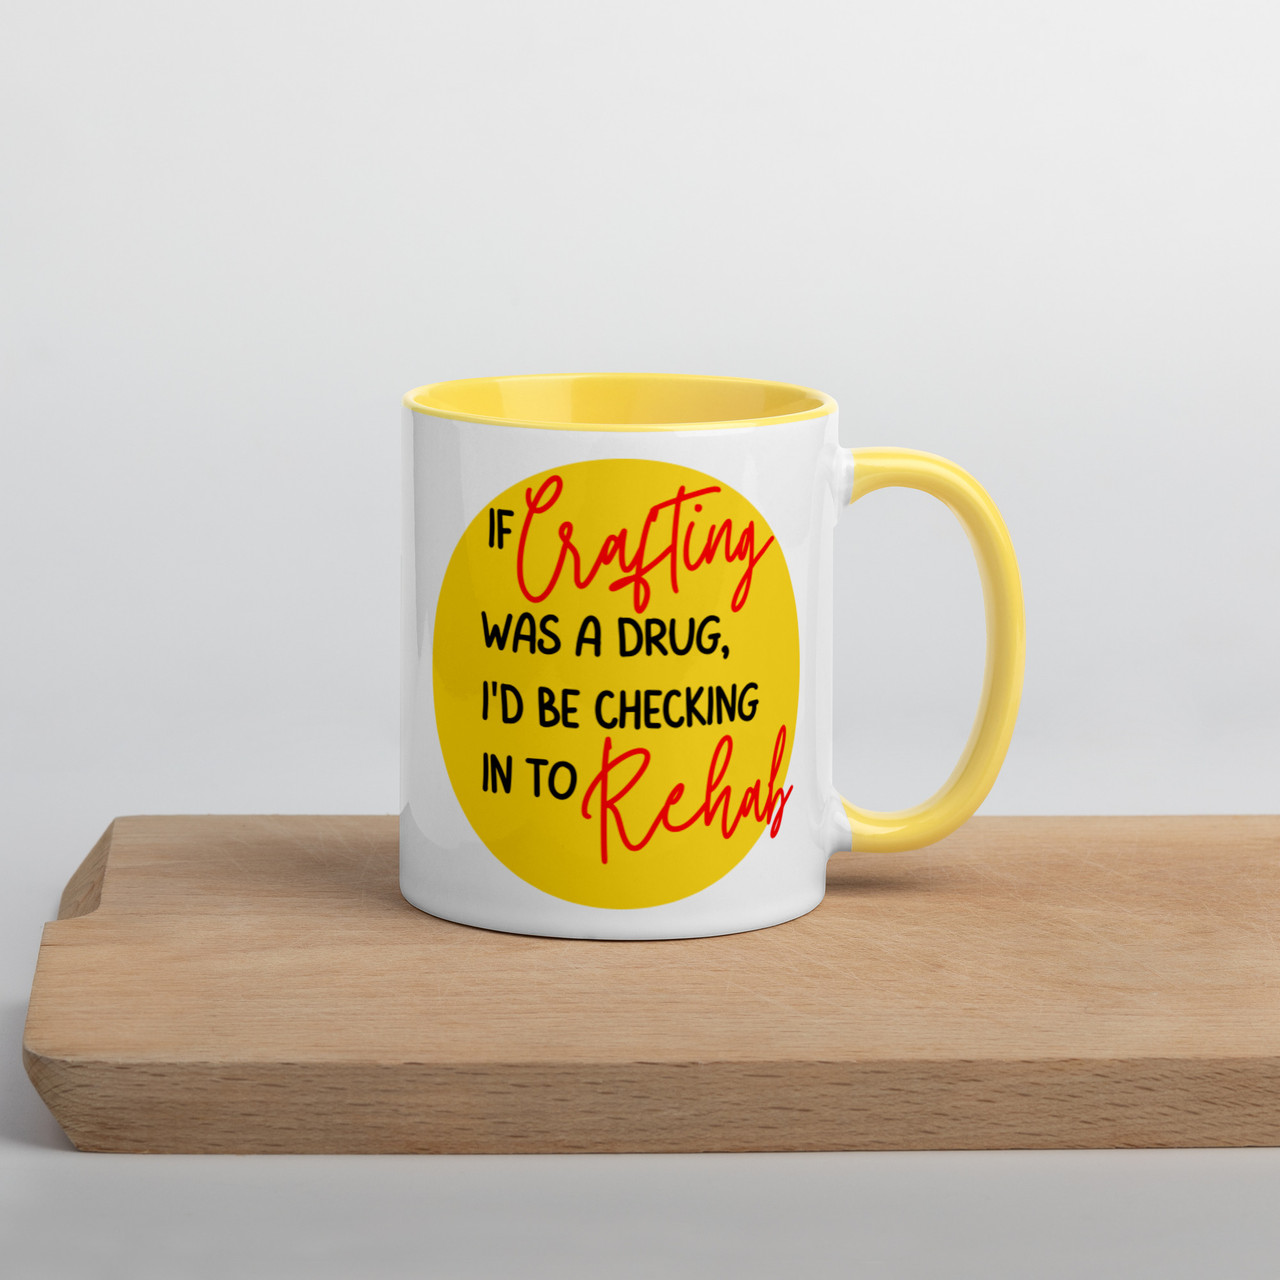 If crafting was a drug - Mug with Colour Inside